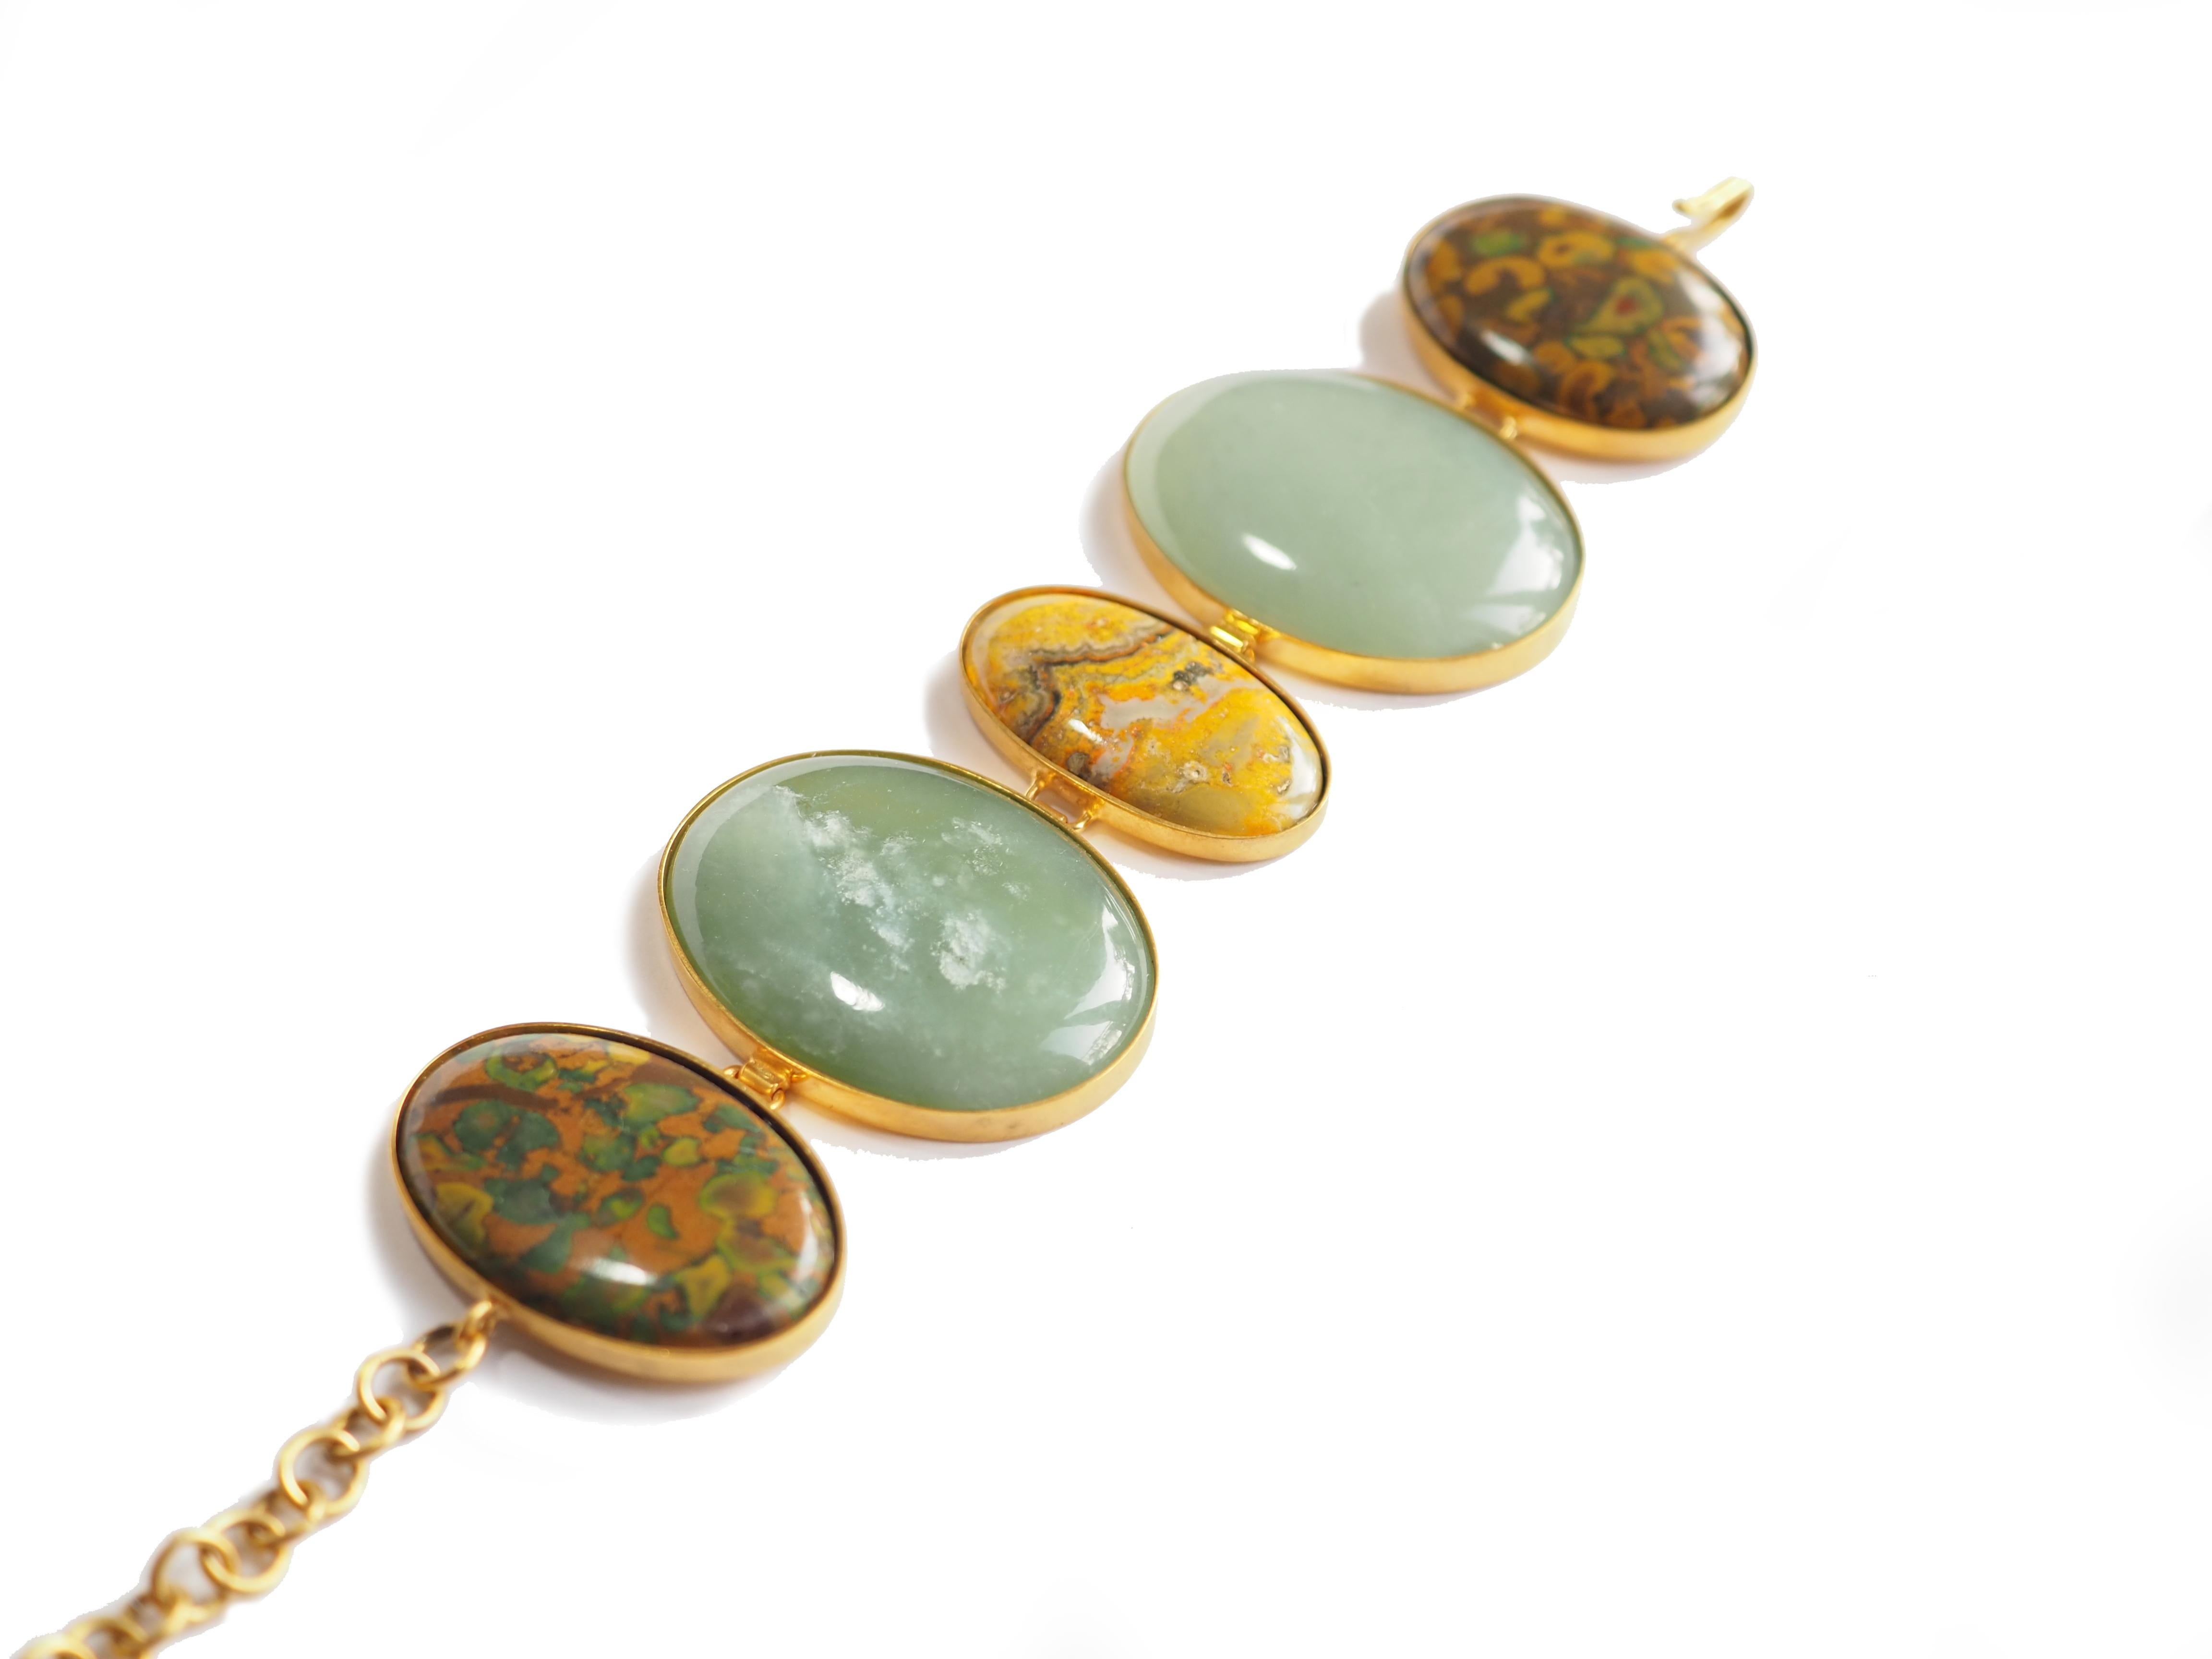 Amazing bracelet with cabochon jade and jasper stone linked in bronze, adjustable max up to 21cm.
All Giulia Colussi jewelry is new and has never been previously owned or worn. Each item will arrive at your door beautifully gift wrapped in our